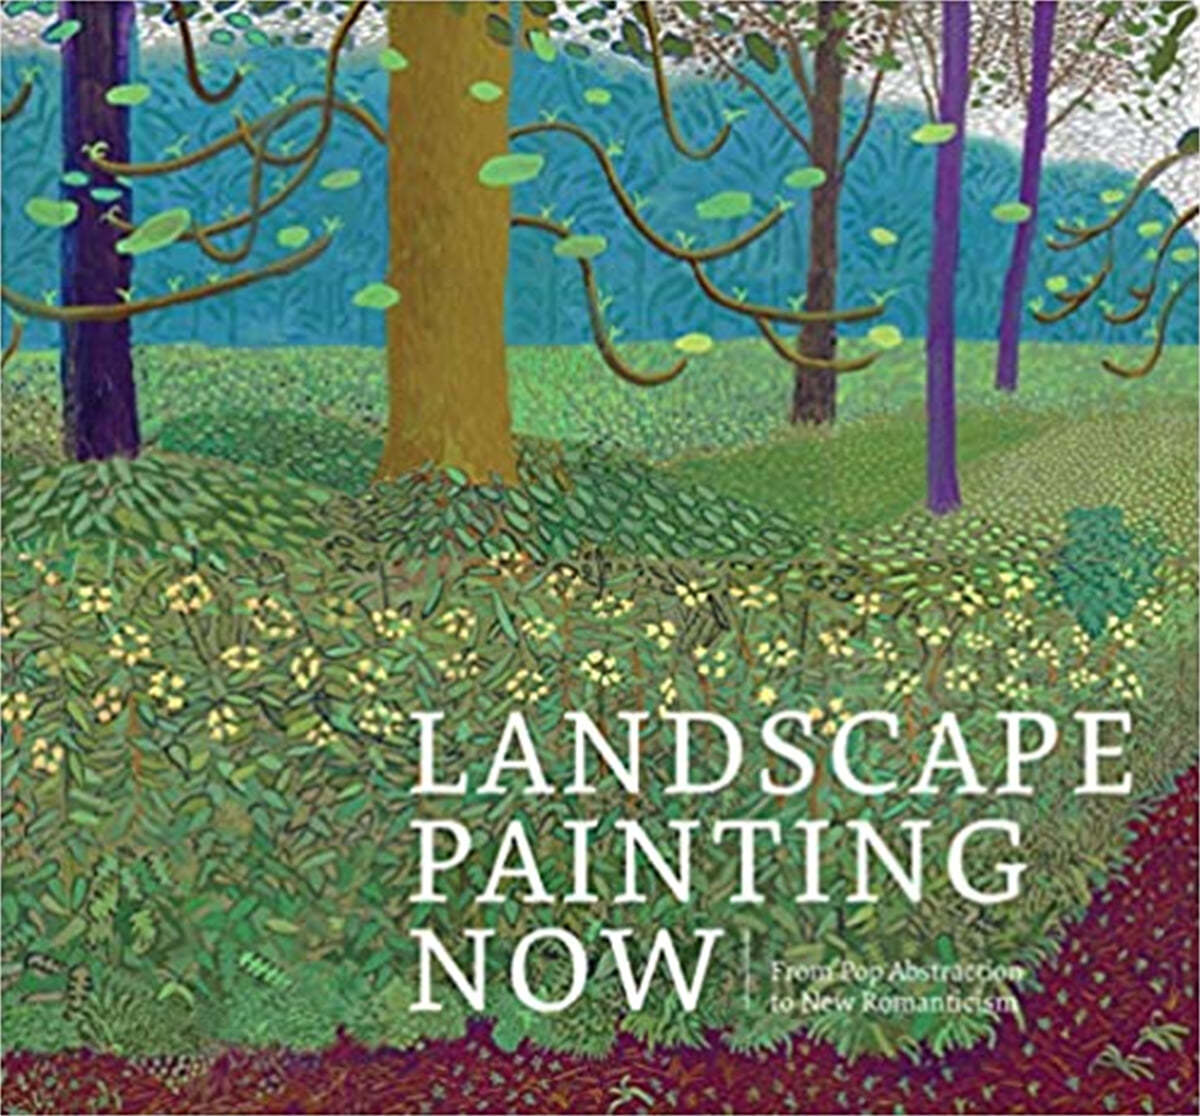 Landscape Painting Now: From Pop Abstraction to New Romanticism